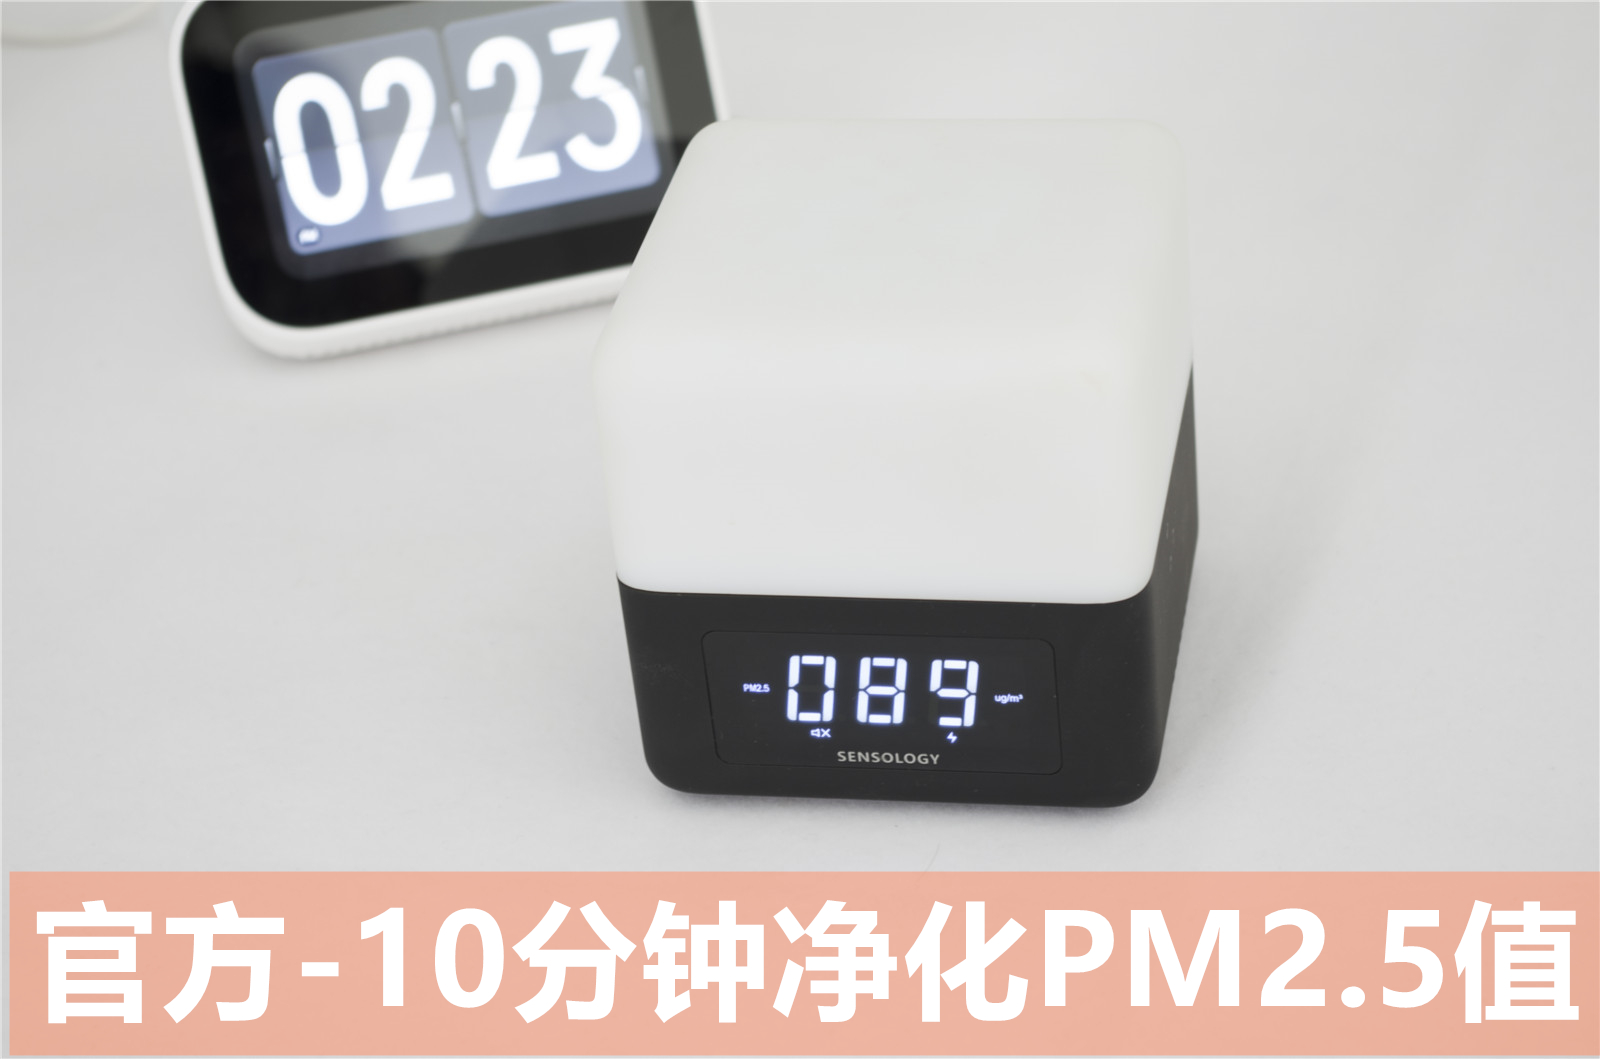 45 yuan-149 yuan we test five Xiaomi air purifier filters: the results are surprising